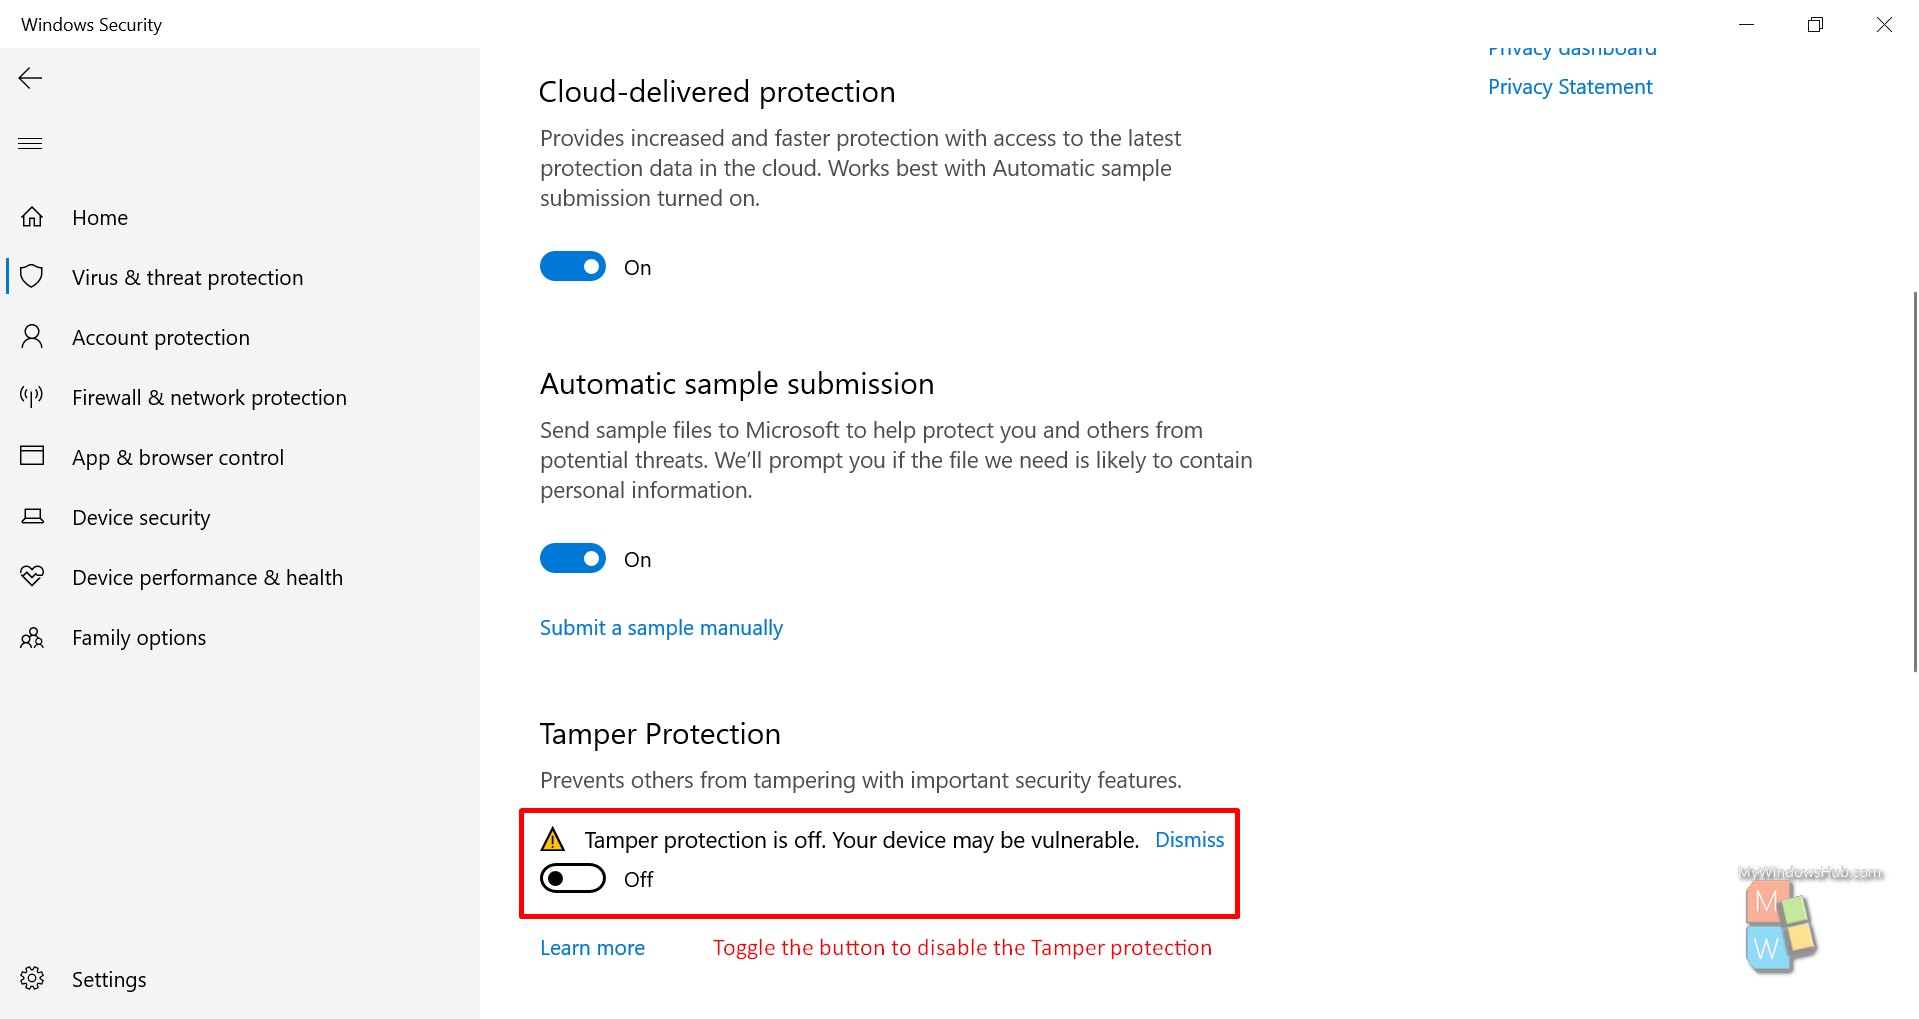 How To Enable/Disable Microsoft Defender Antivirus On Windows 10